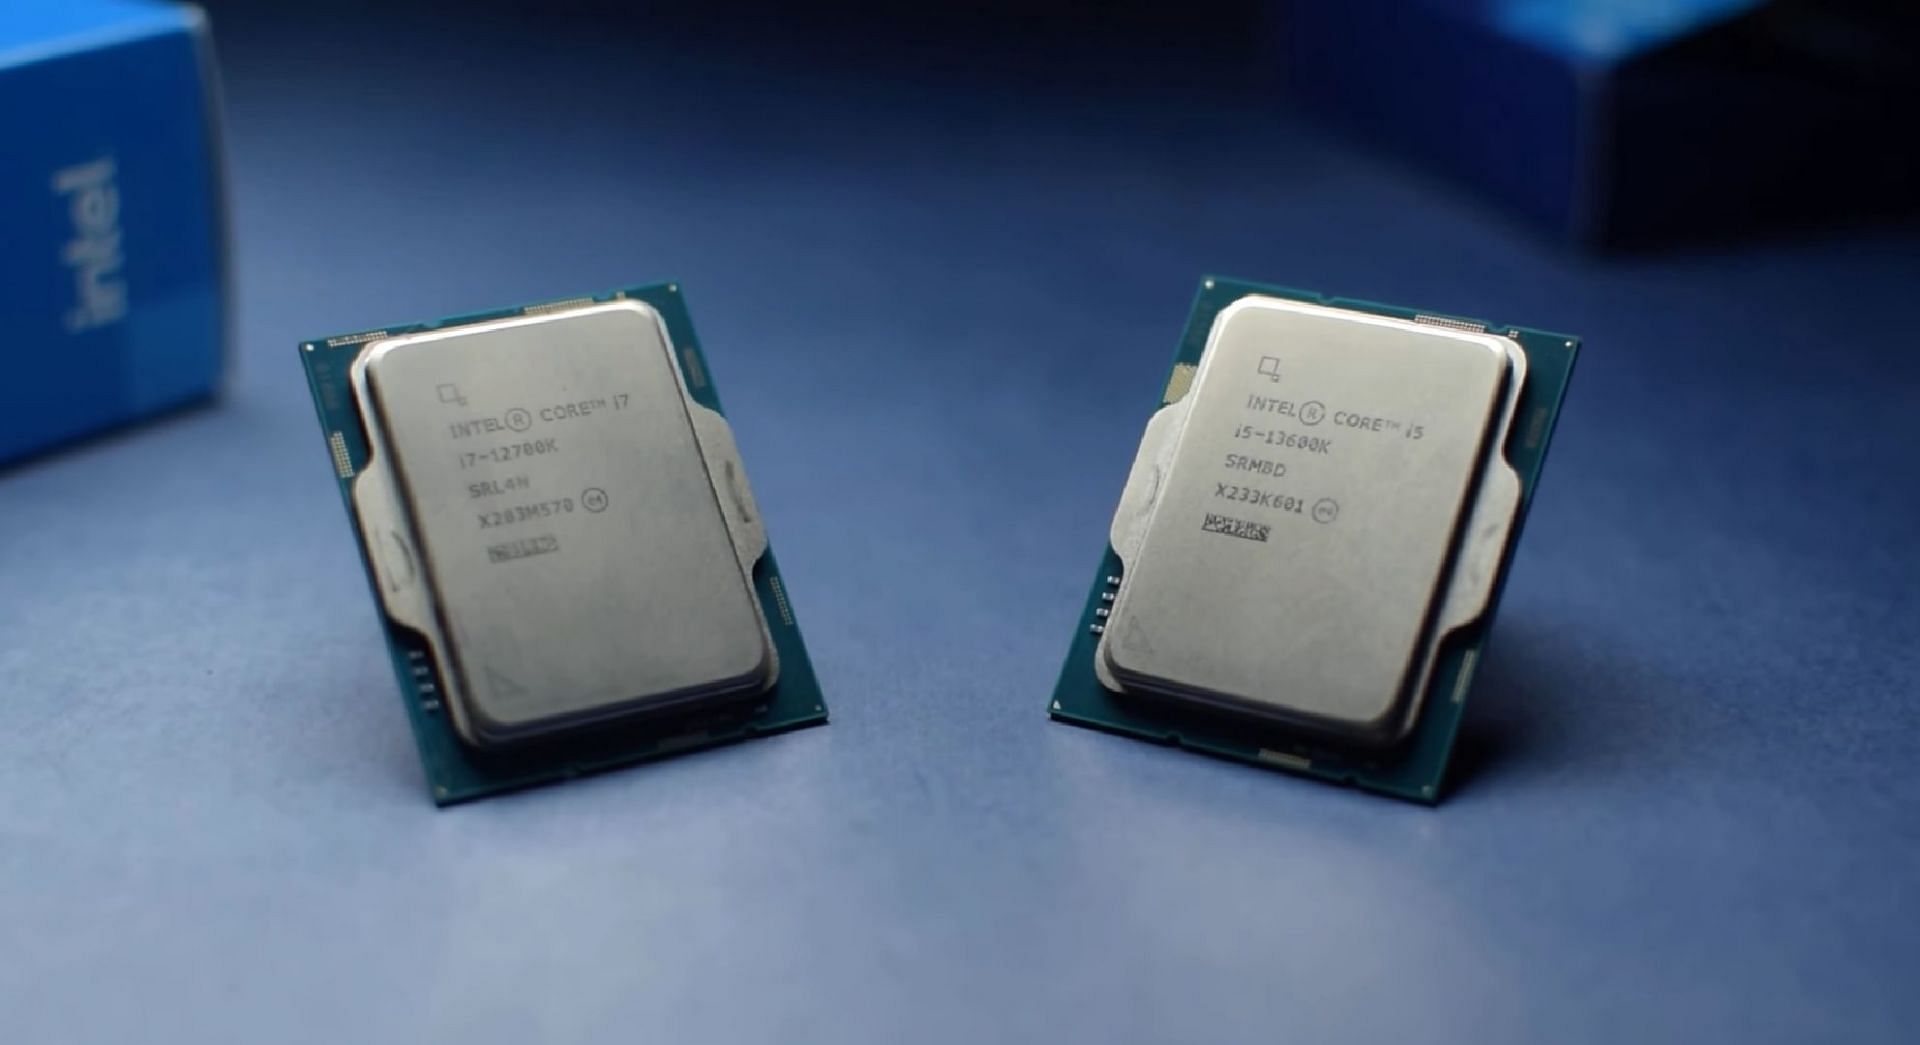 Picture of the battle of two Intel Core CPU